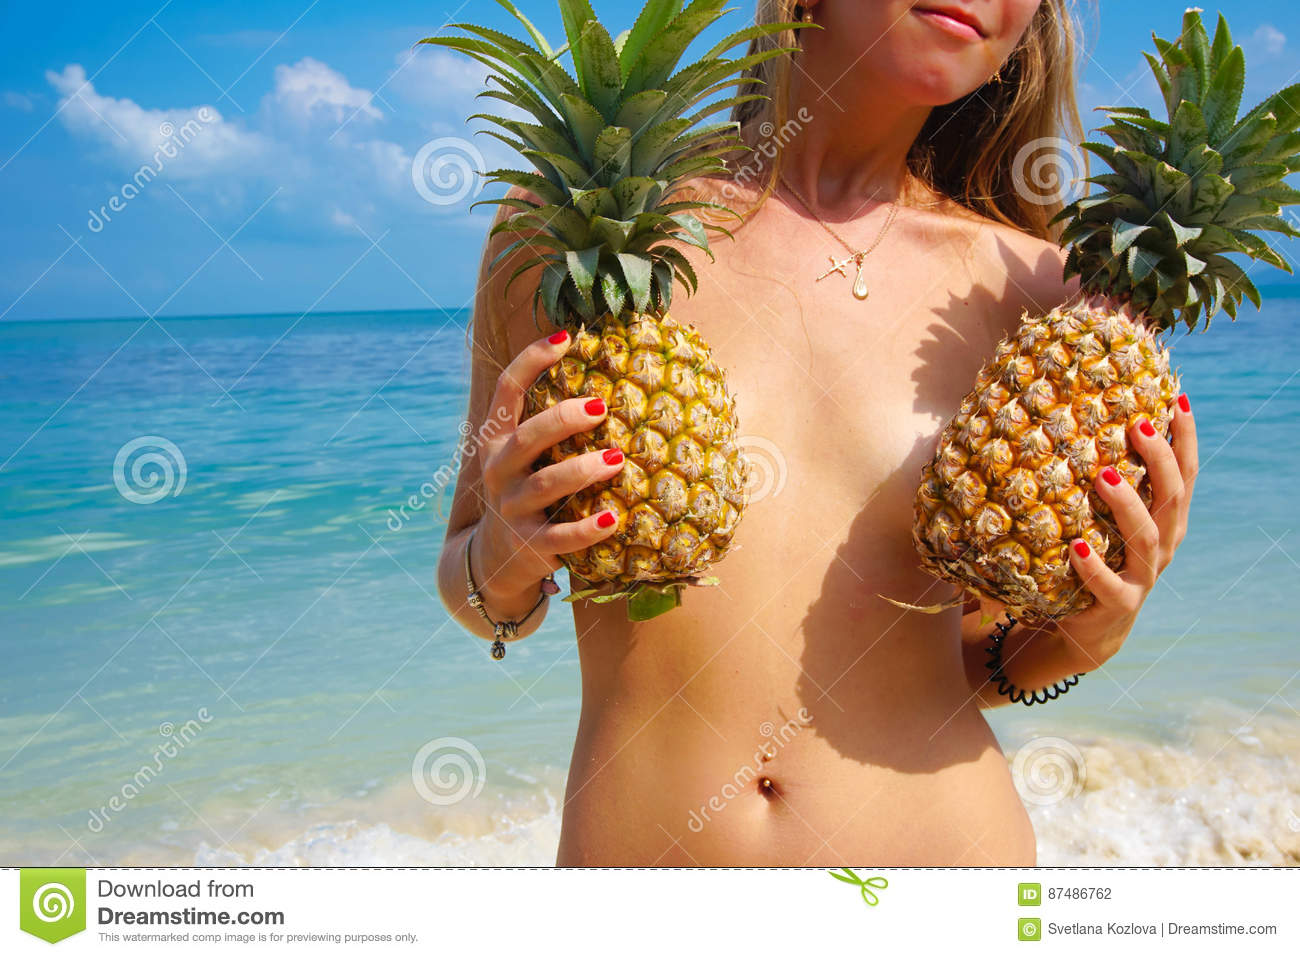 close-up-sexy-girl-pineapples-tropical-sea-background-beach-party-style-87486762.jpg